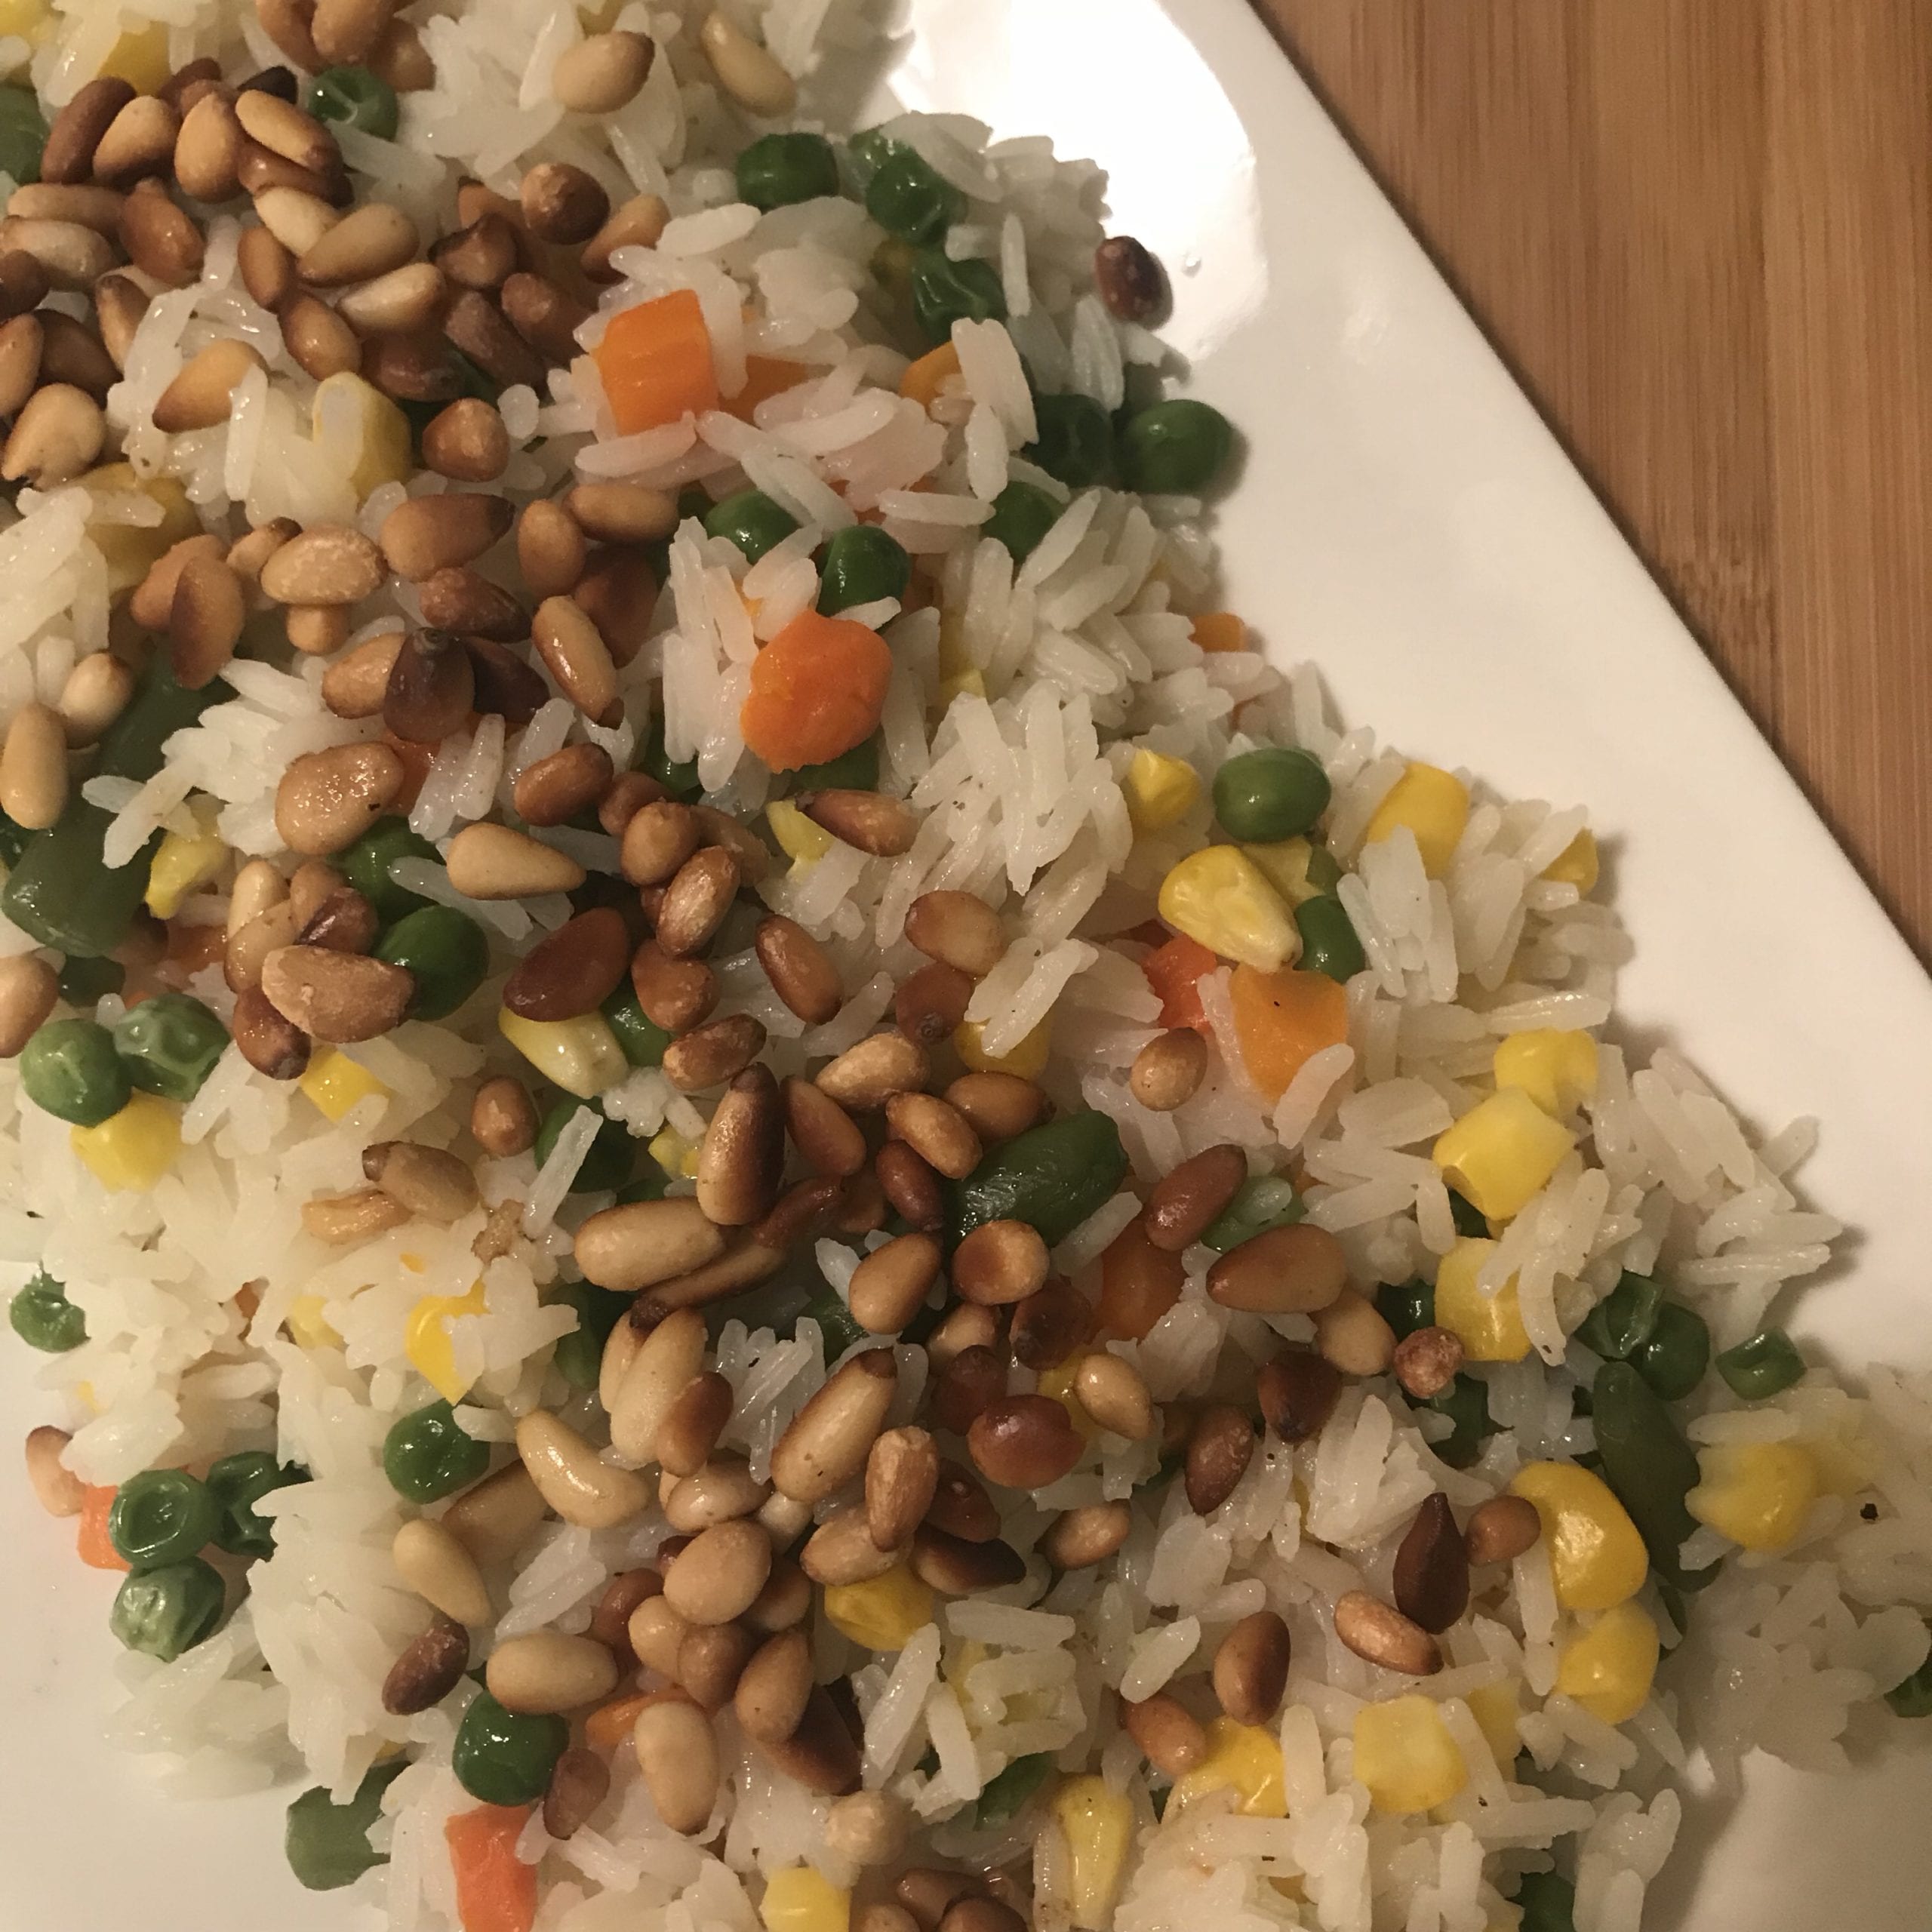 [RECIPE] Easy Rice with Mixed Veggies - A Muslim Dietitian